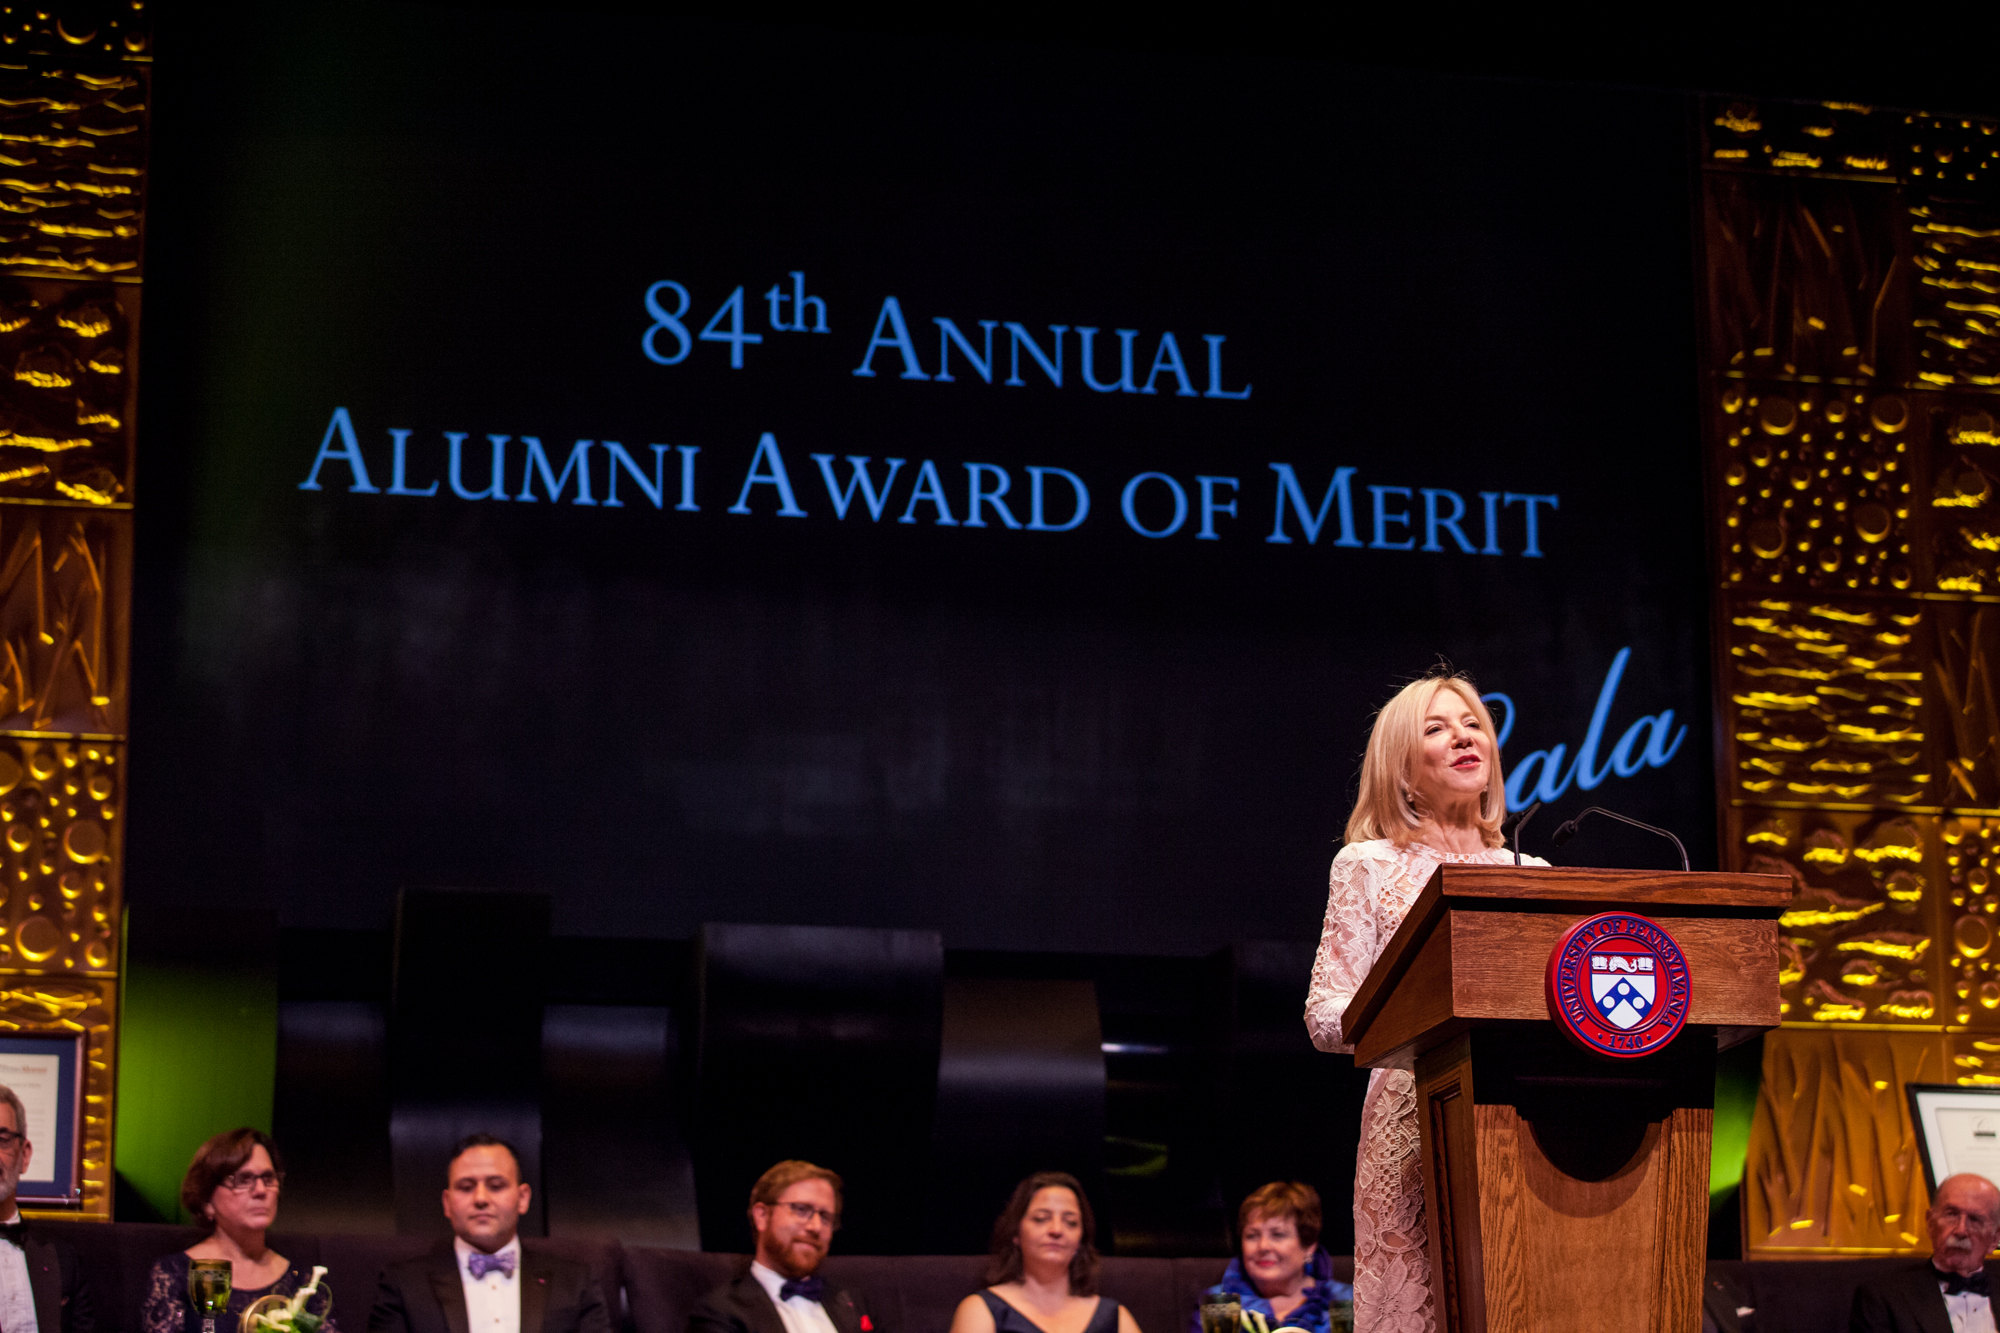 President Amy Gutmann addresses the crowd at the podium